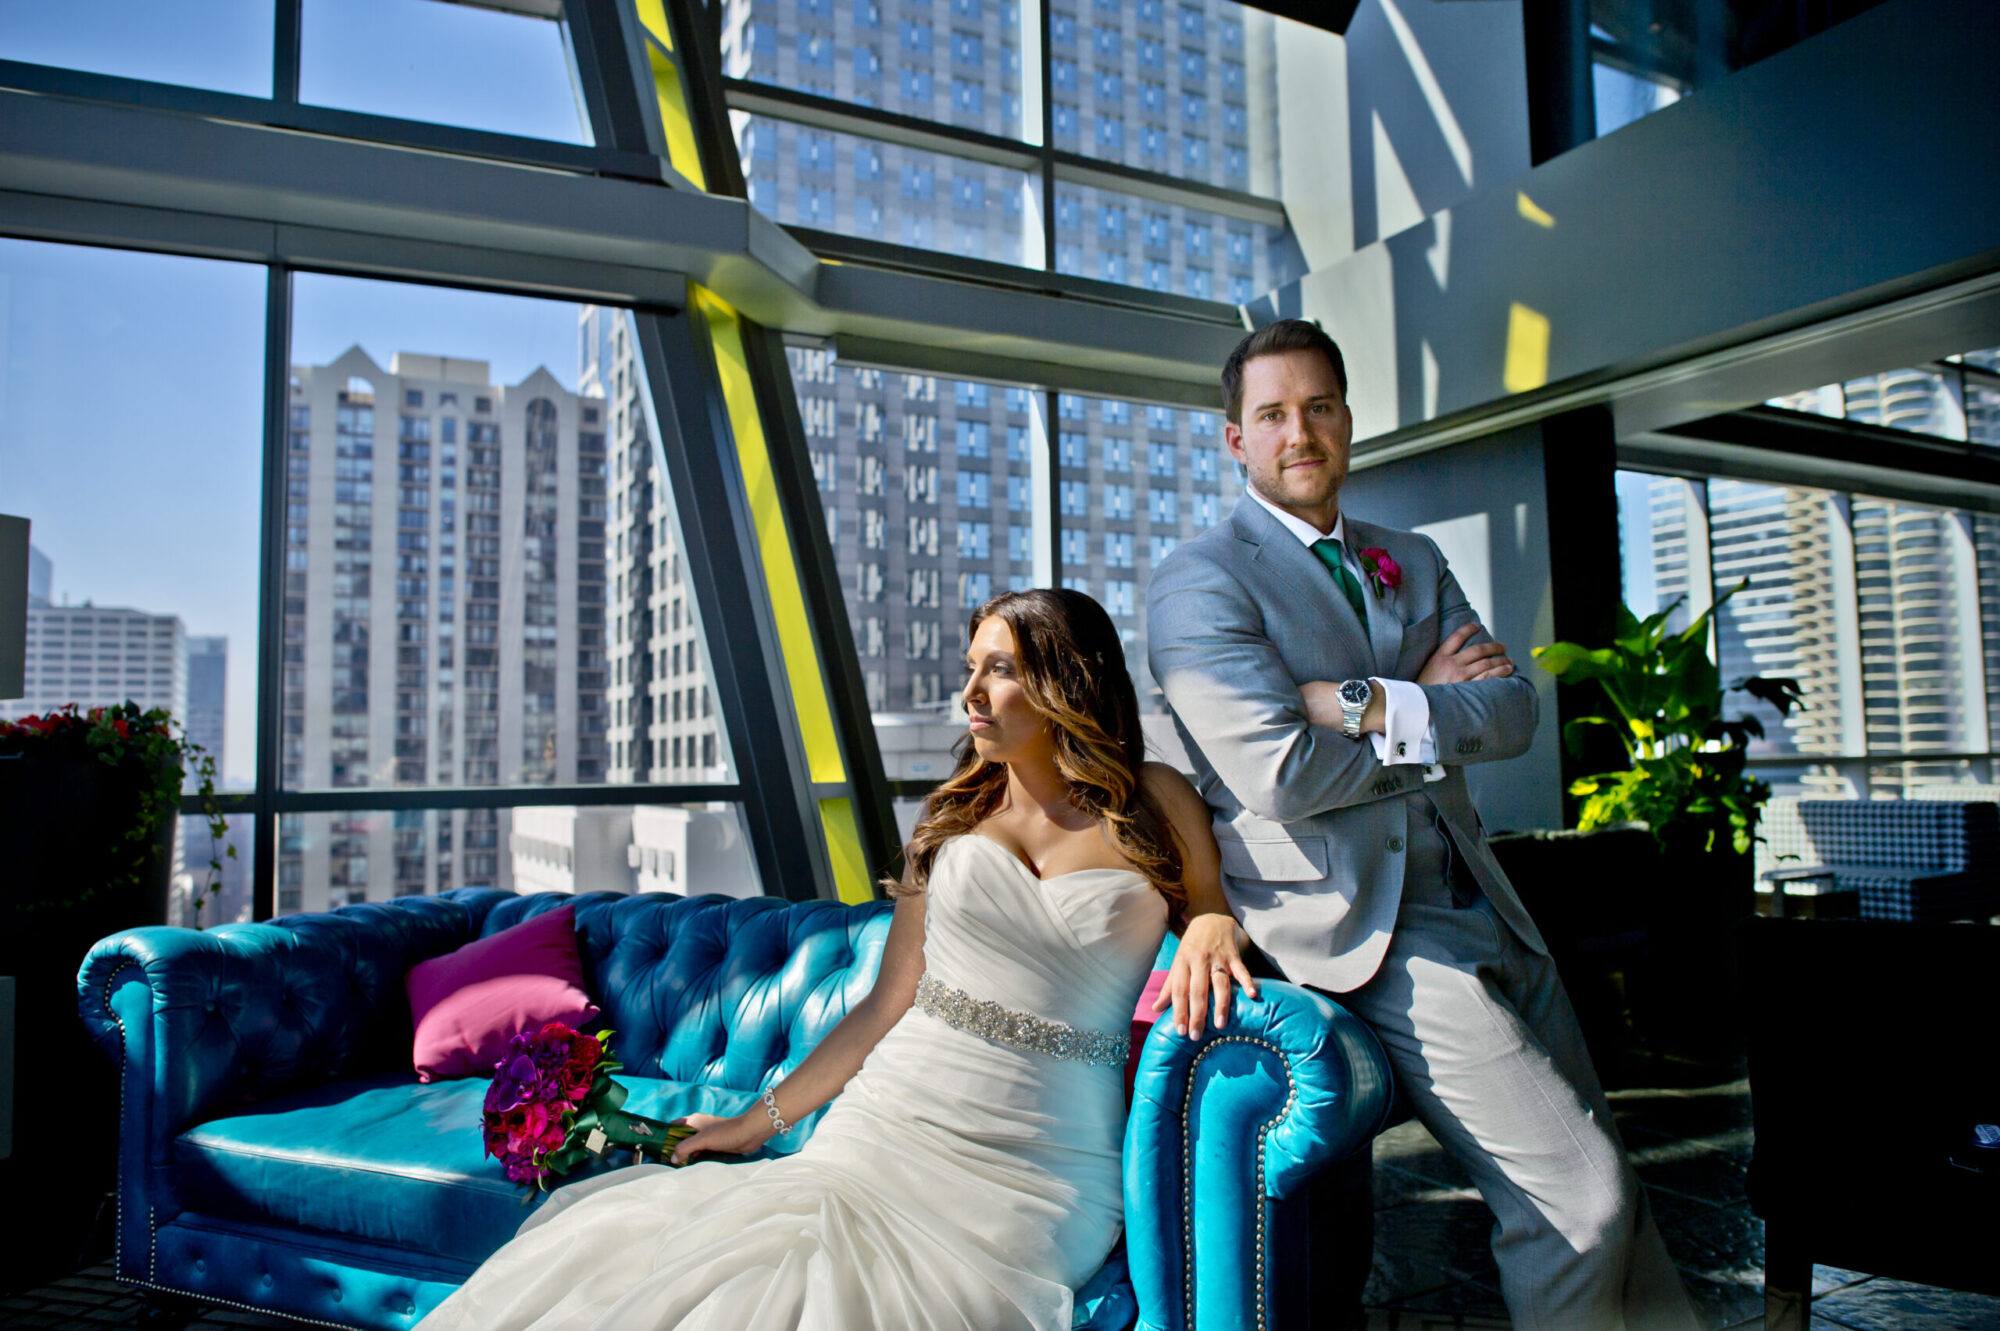 A bride and groom sitting together in an elegant hotel with a blue couch and gorgeous light and colors. Family and wedding photography in Pittsburgh.